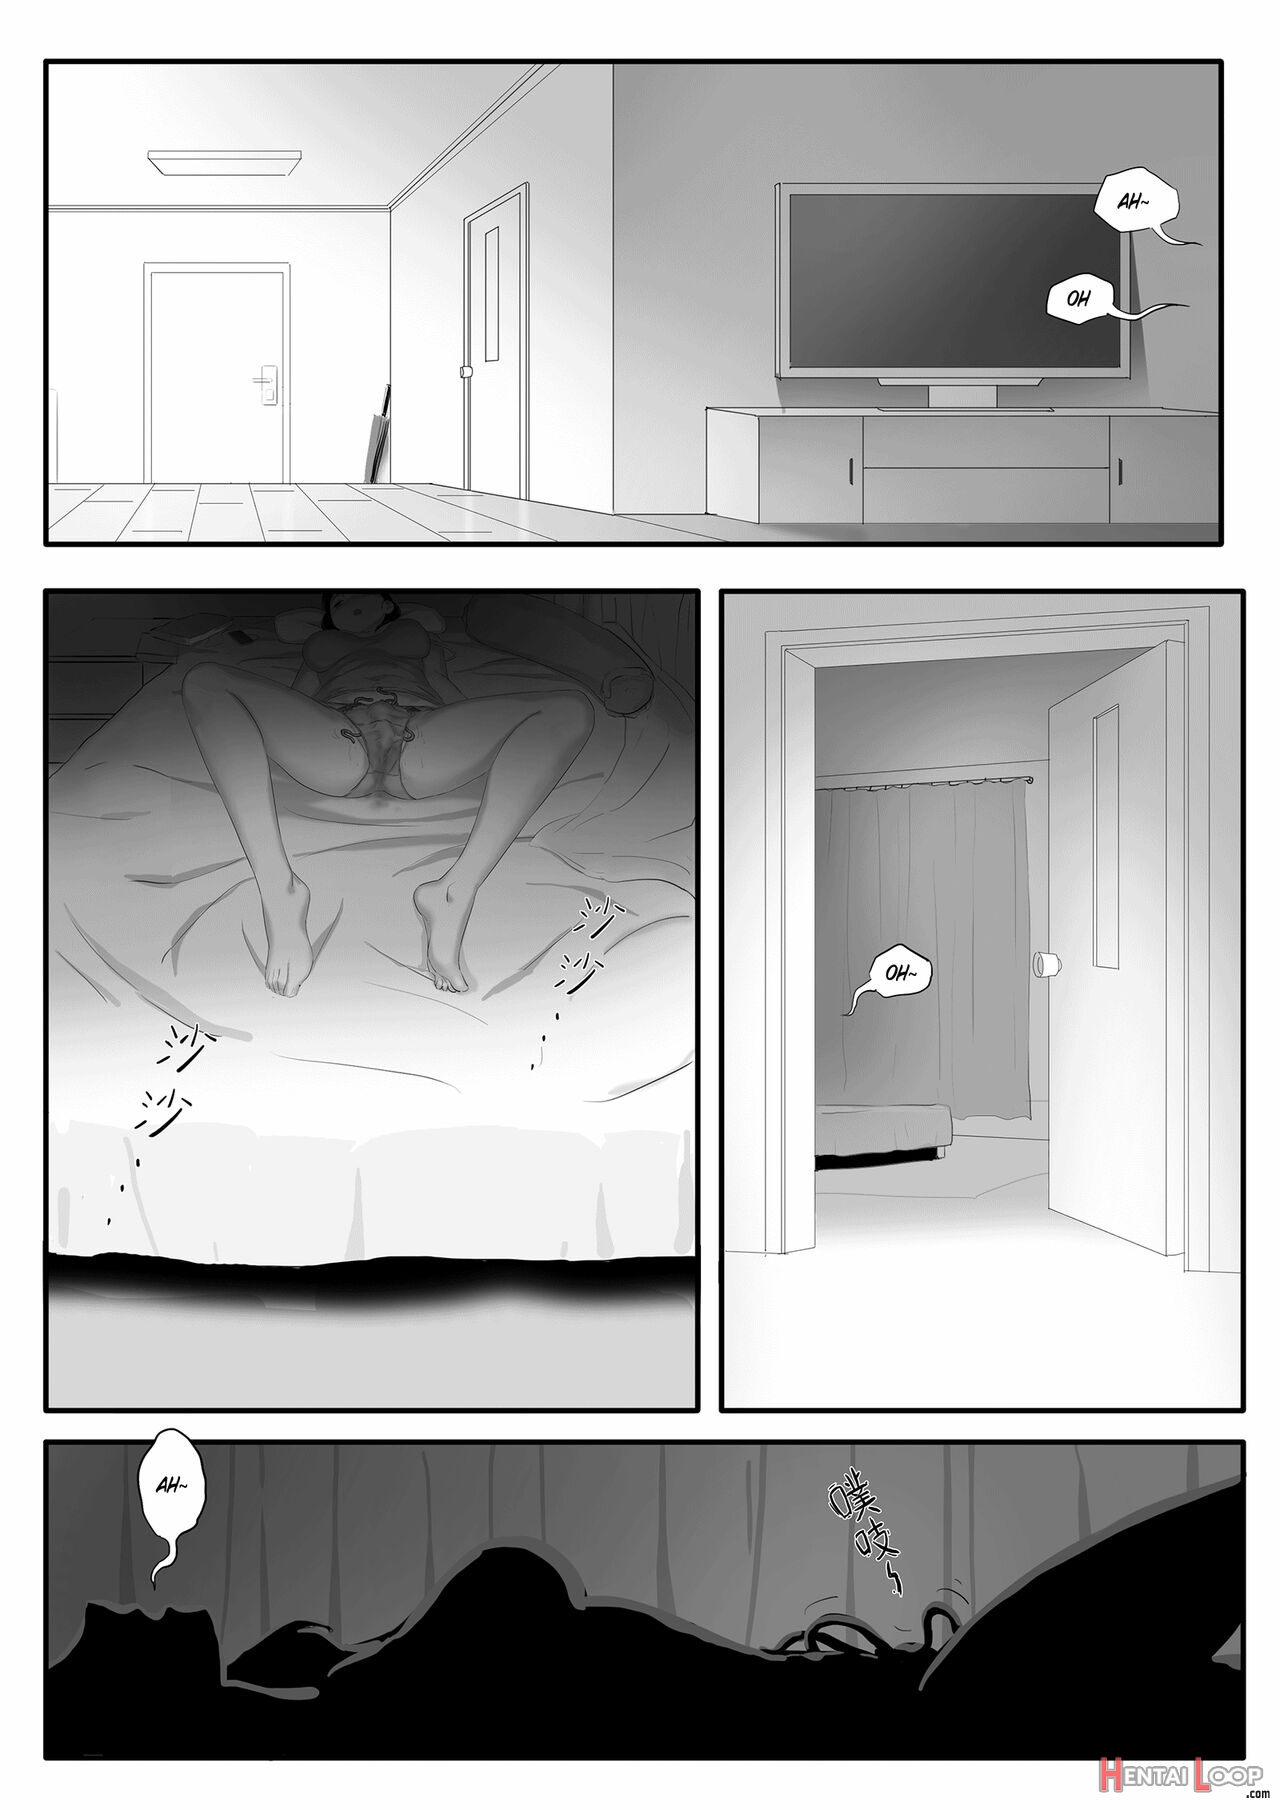 Parasite Extra Chapter - Neighbour page 2